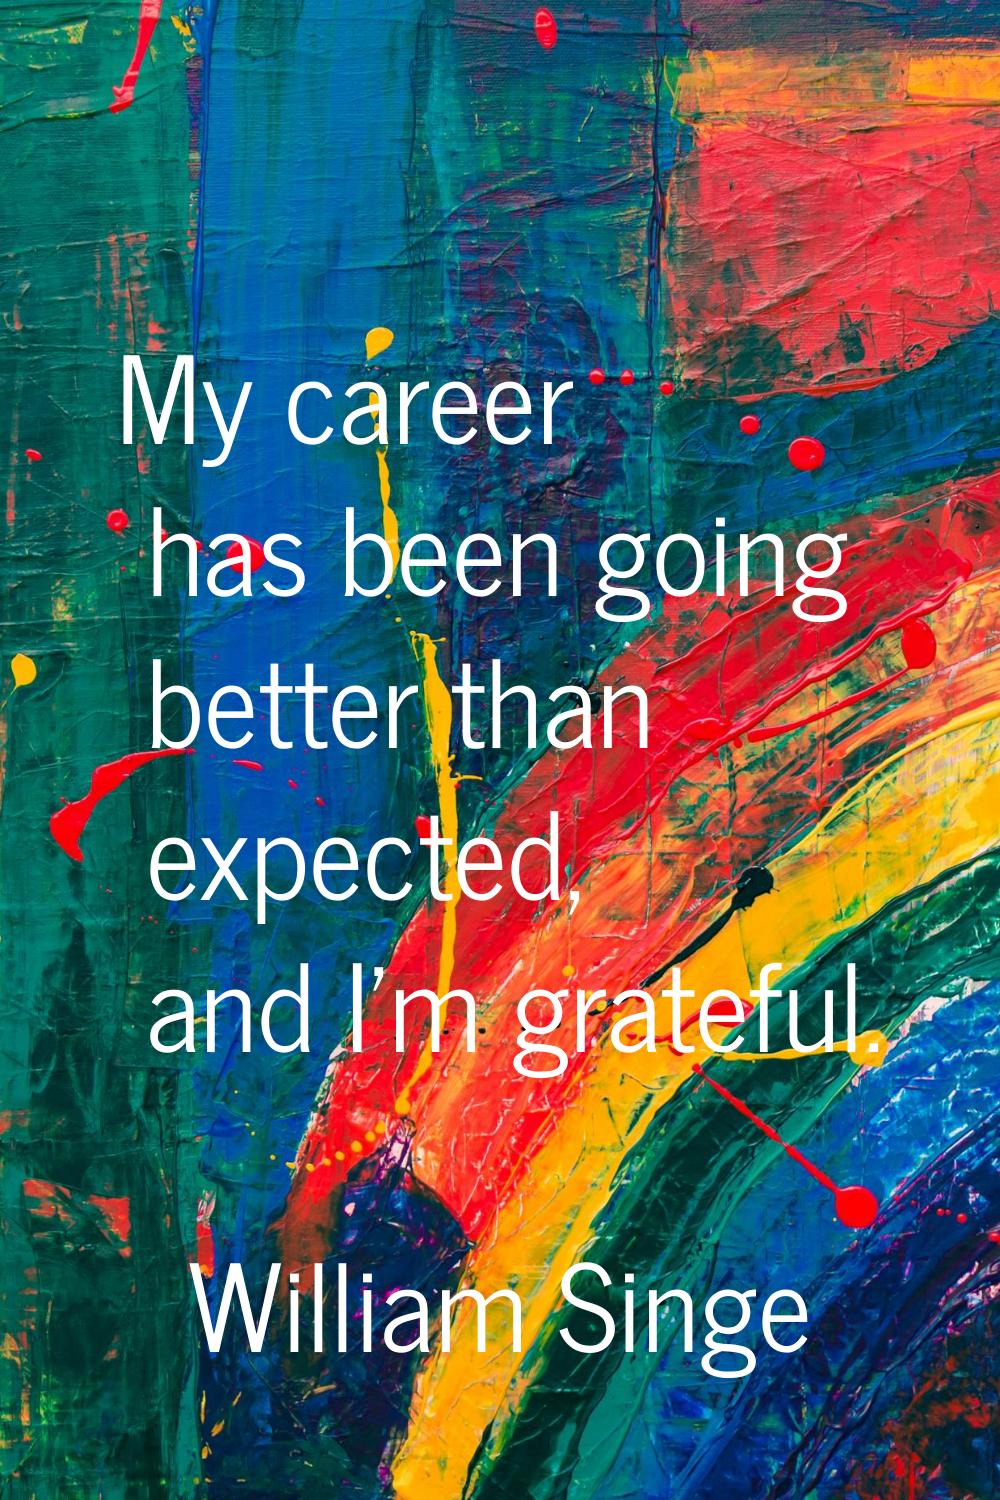 My career has been going better than expected, and I'm grateful.